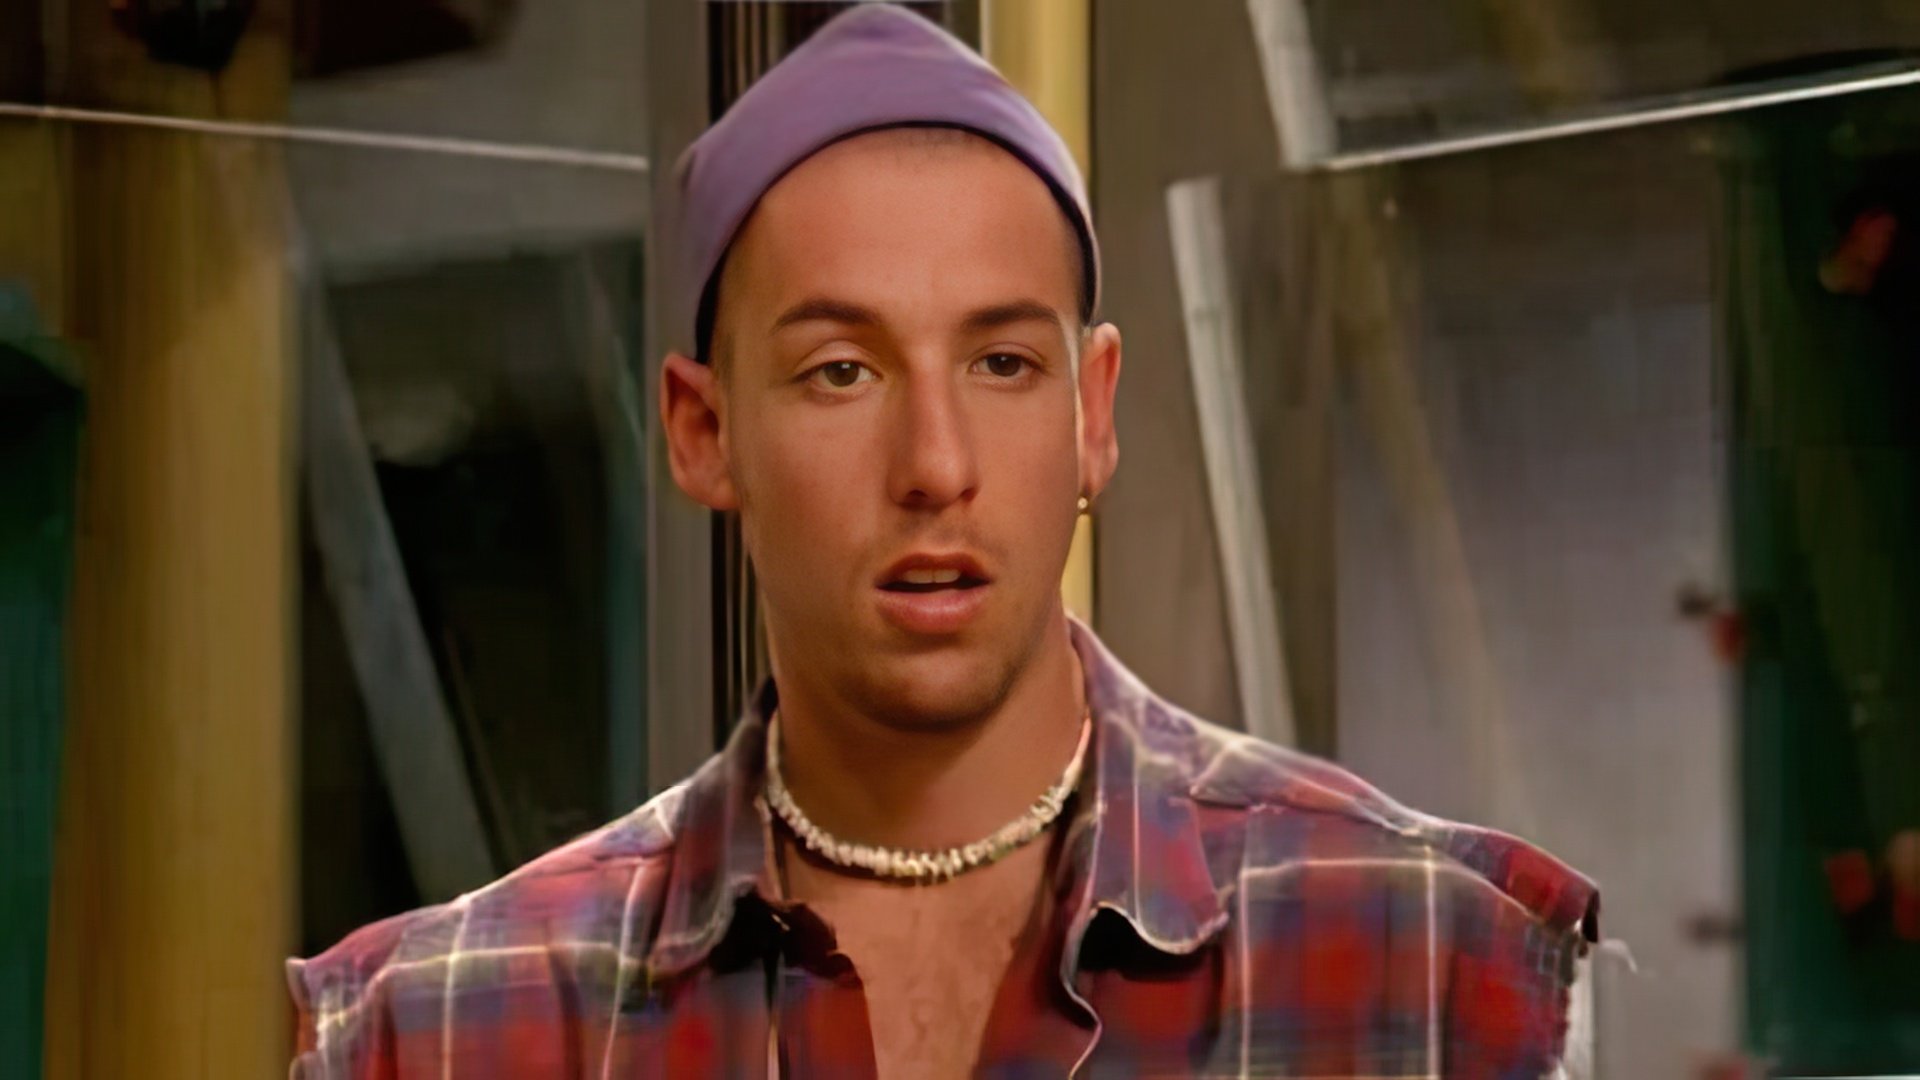 Adam Sandler before he became famous